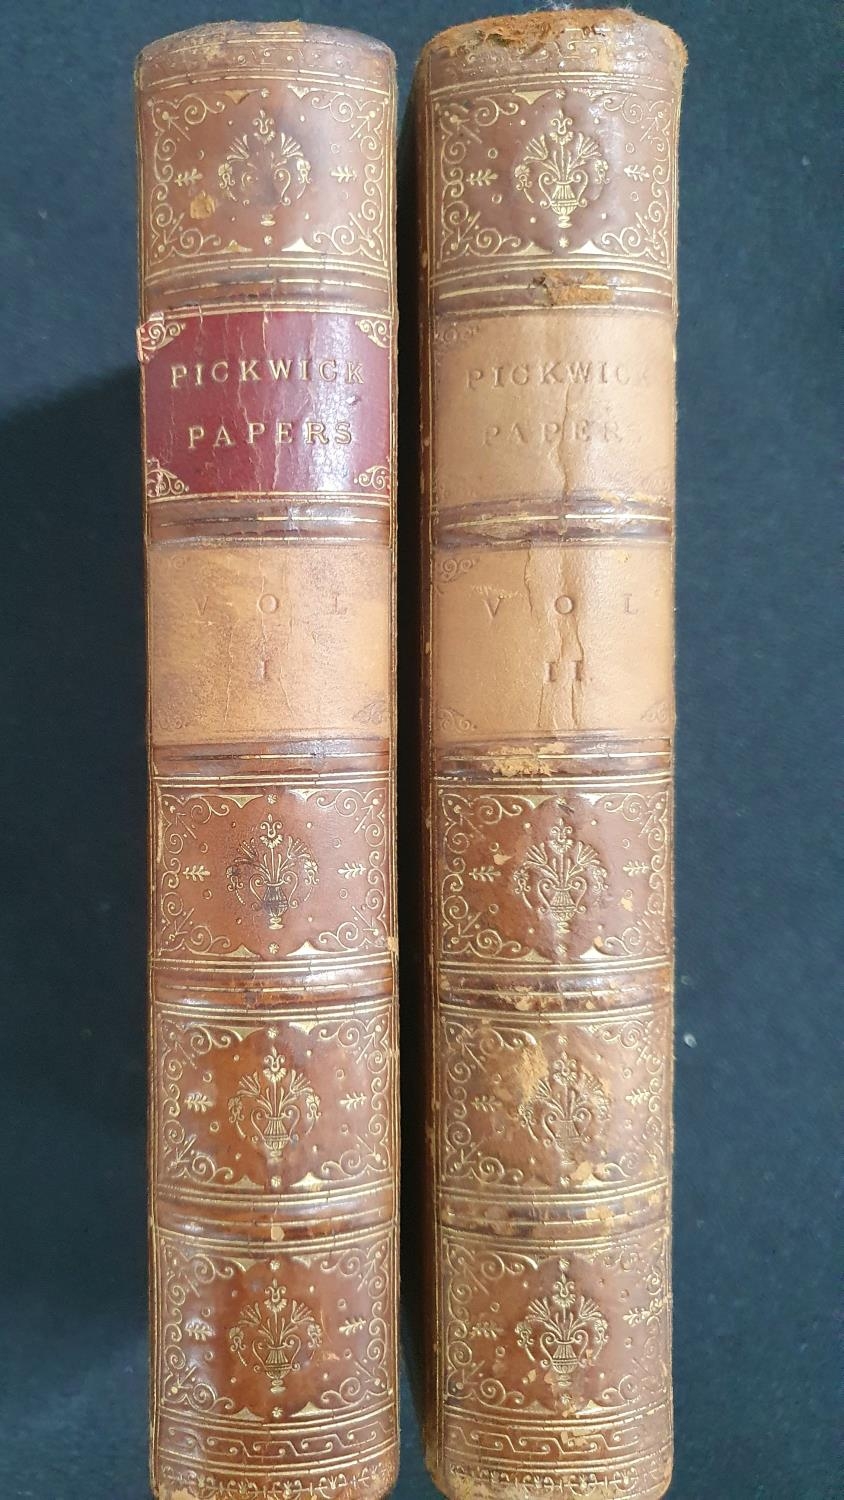 The Posthumus papers of the Pickwick club volumes I & II, 1866 Library edition by Charles Dickens - Image 2 of 9